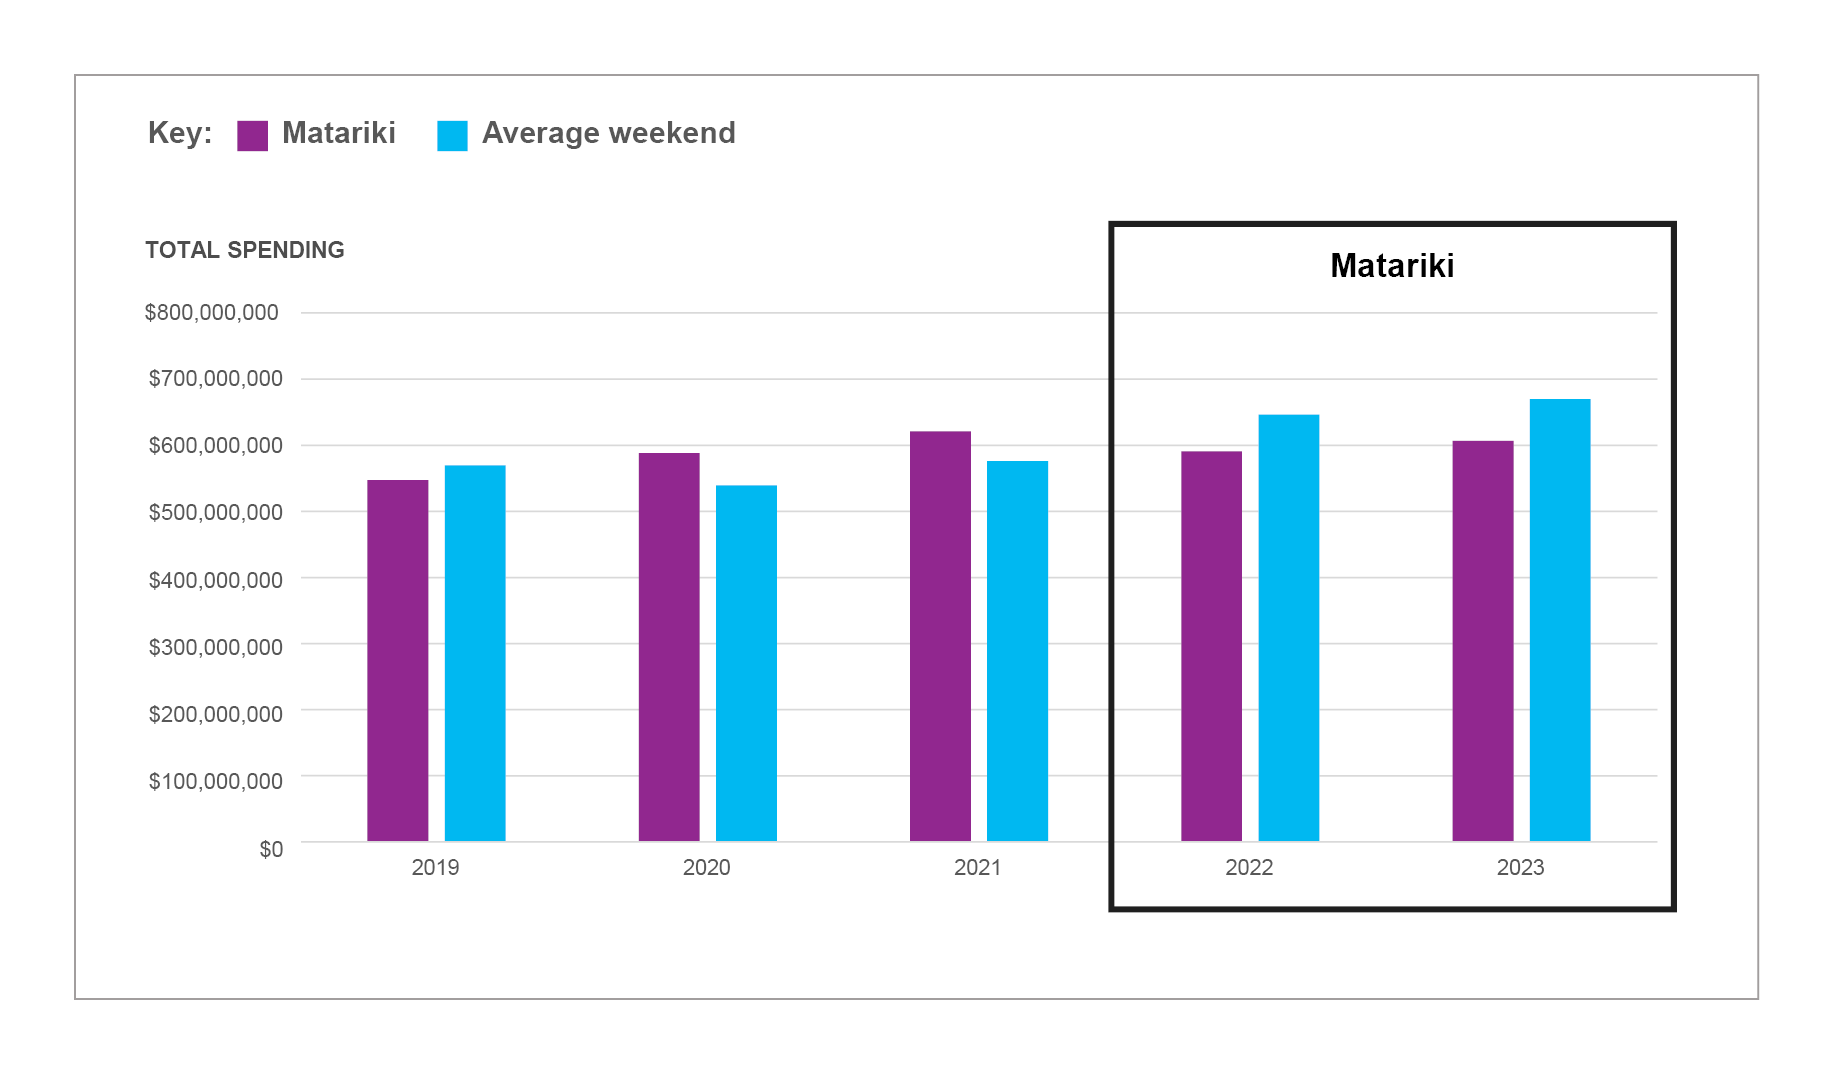 Bar graph showing the total consumer spend over Matariki and comparable weekends, there is a box around the  Matariki bars.